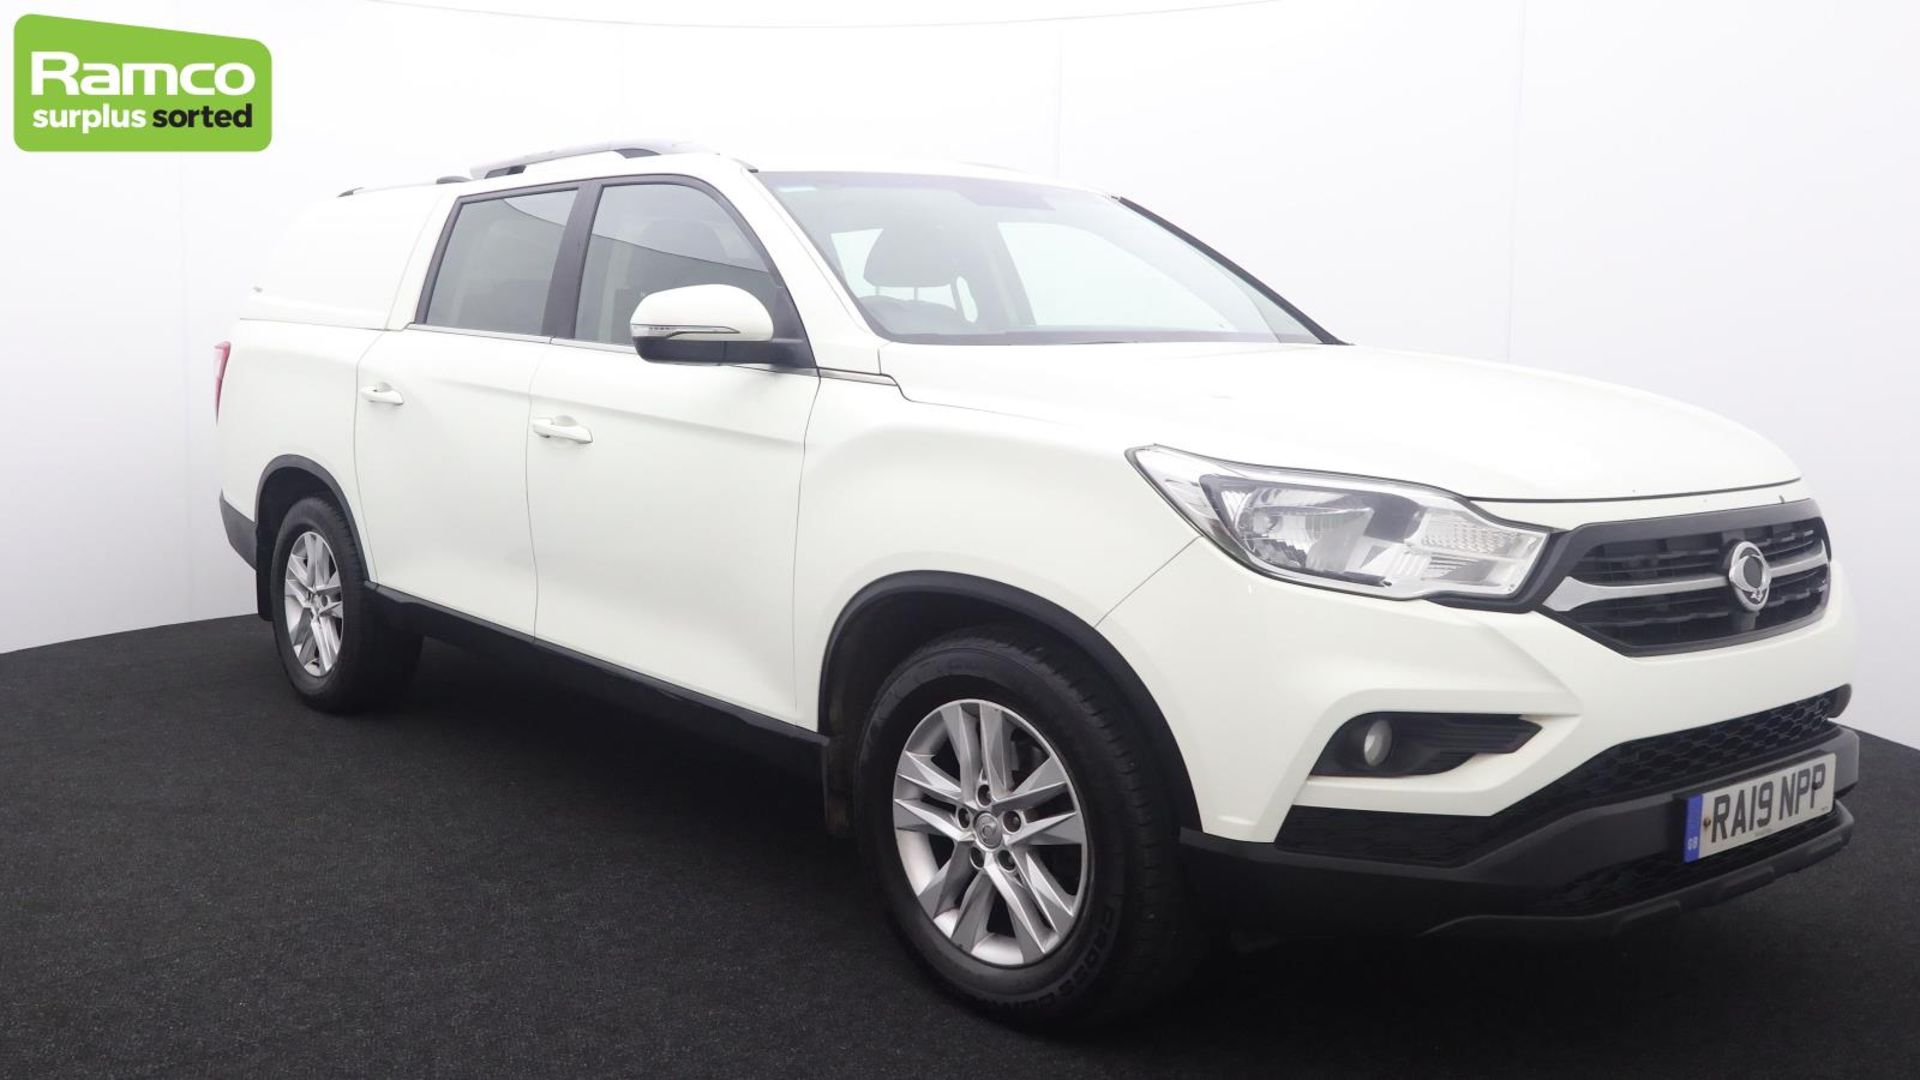 SsangYong Musso Rebel Auto RA19 NPP 2.2L Pick Up Euro 6 - Image 3 of 45